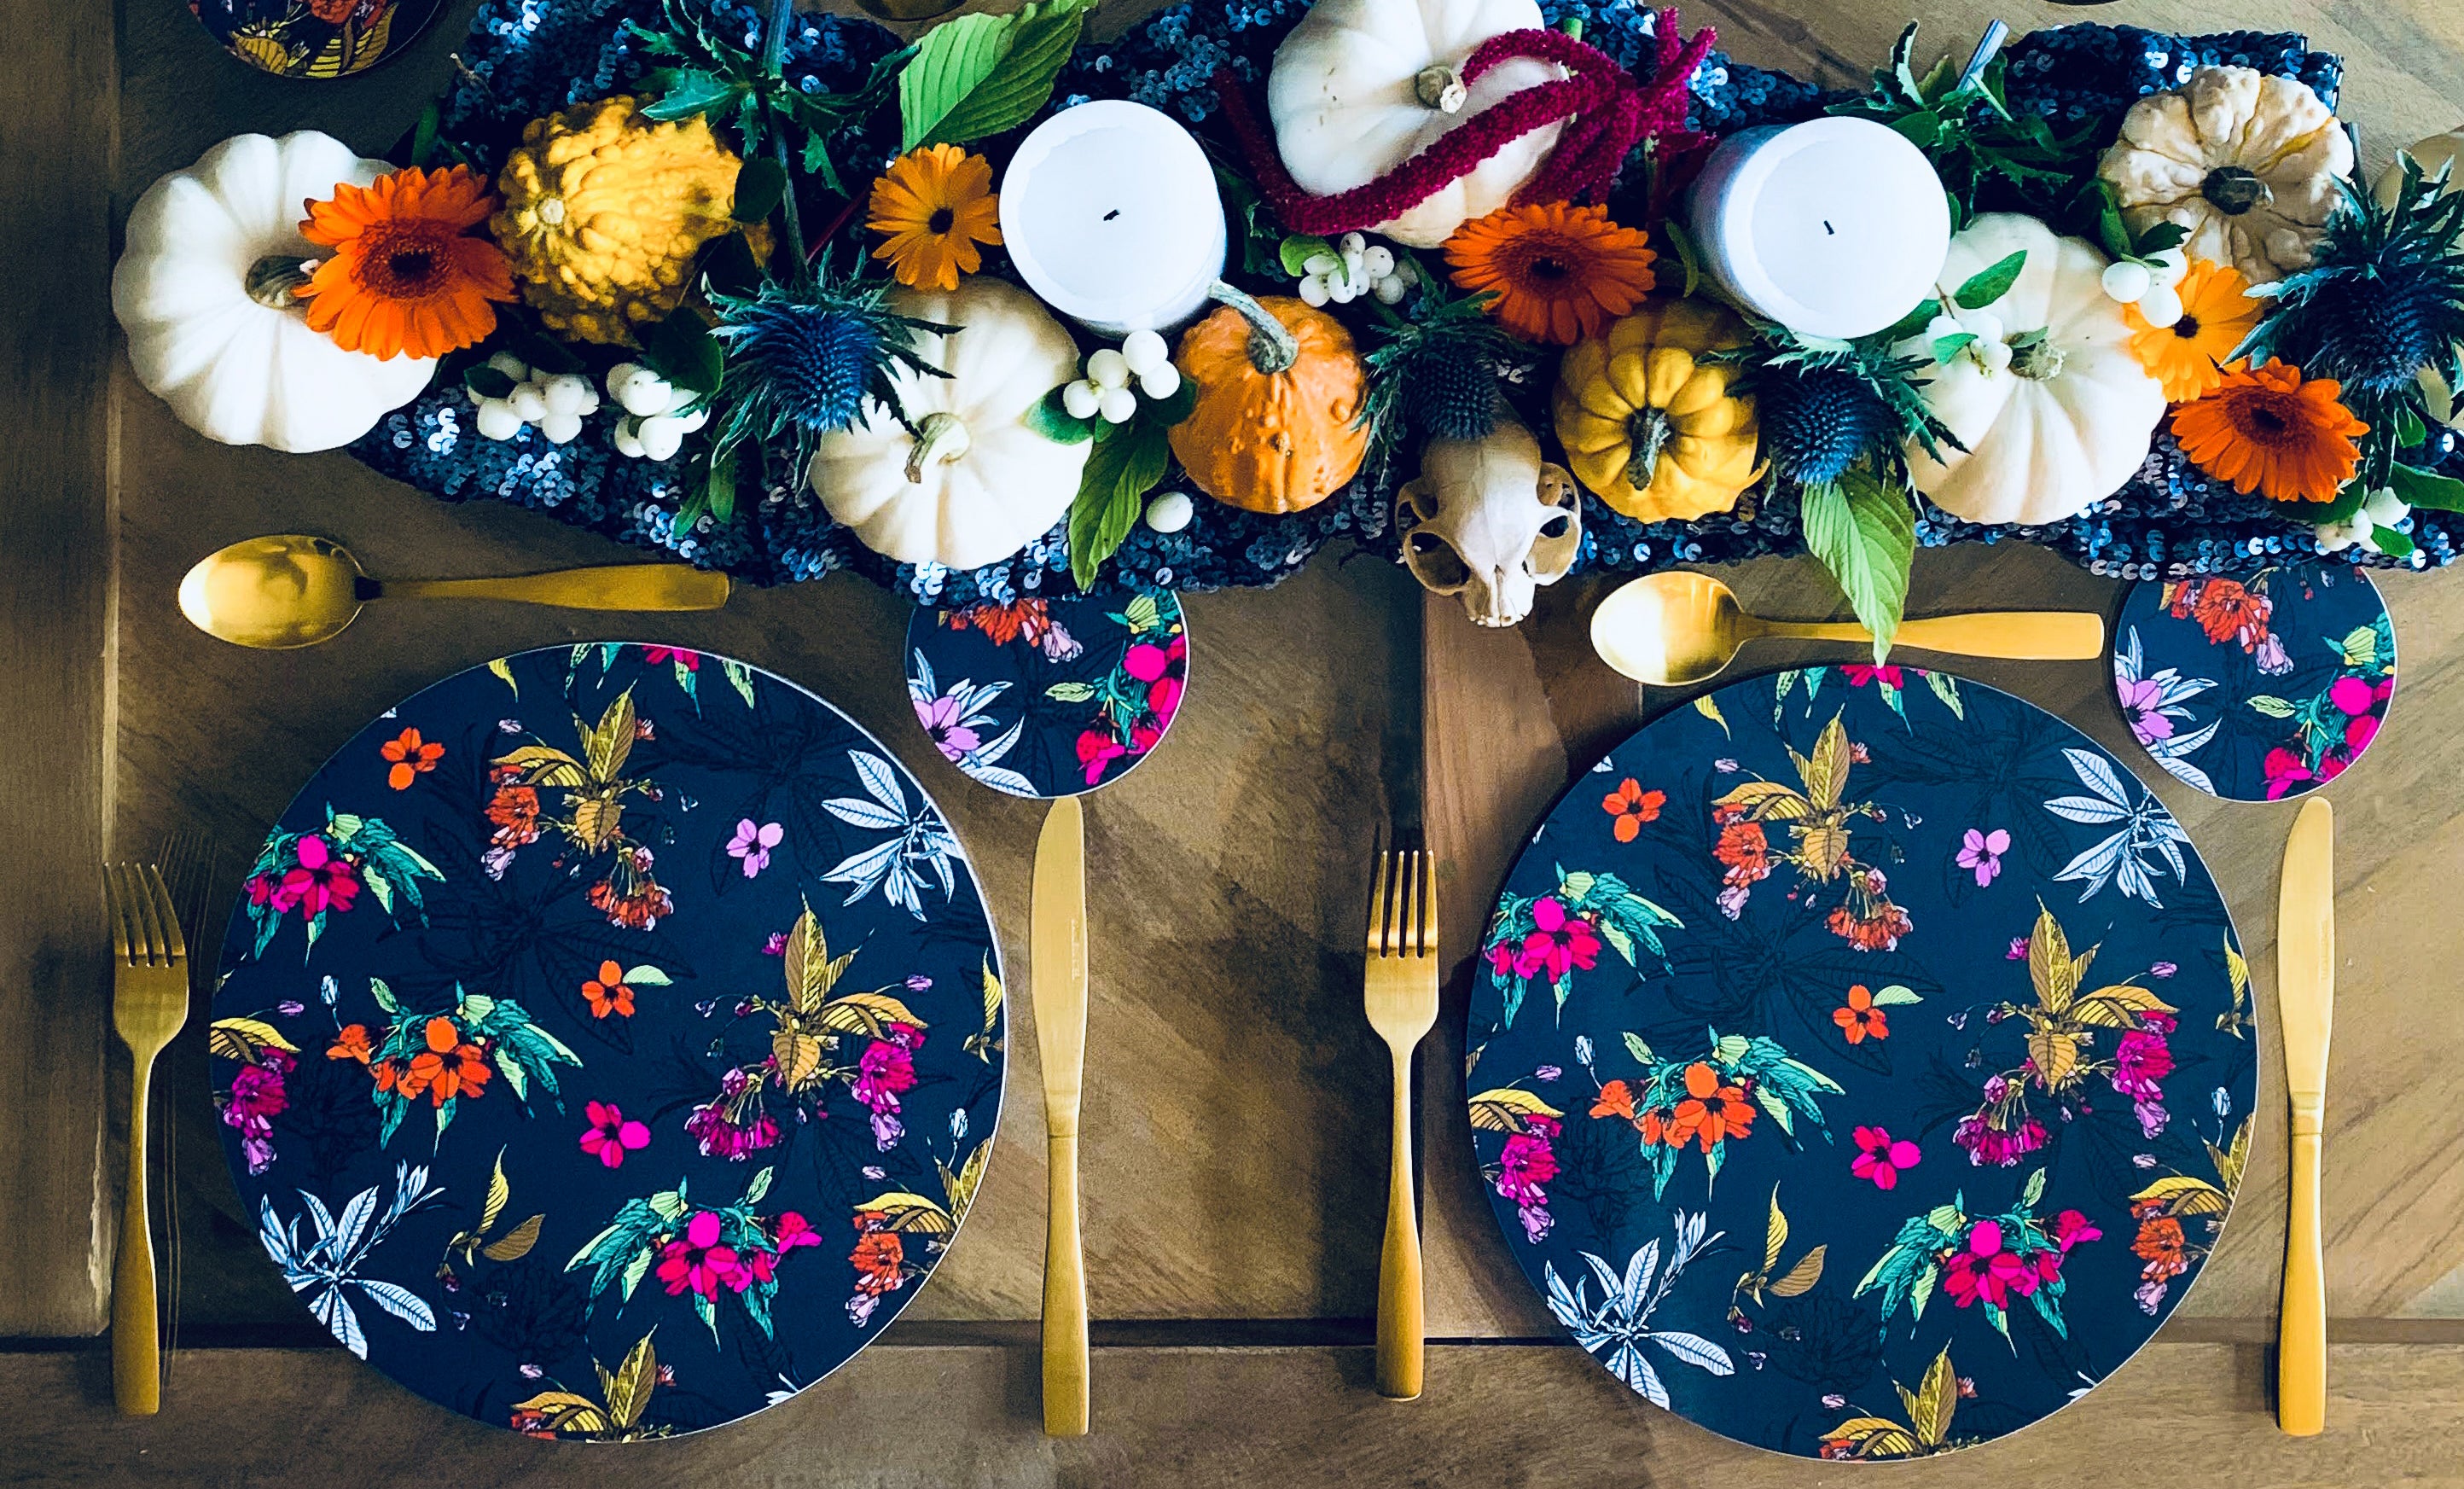 How to wow your Halloween dinner guests